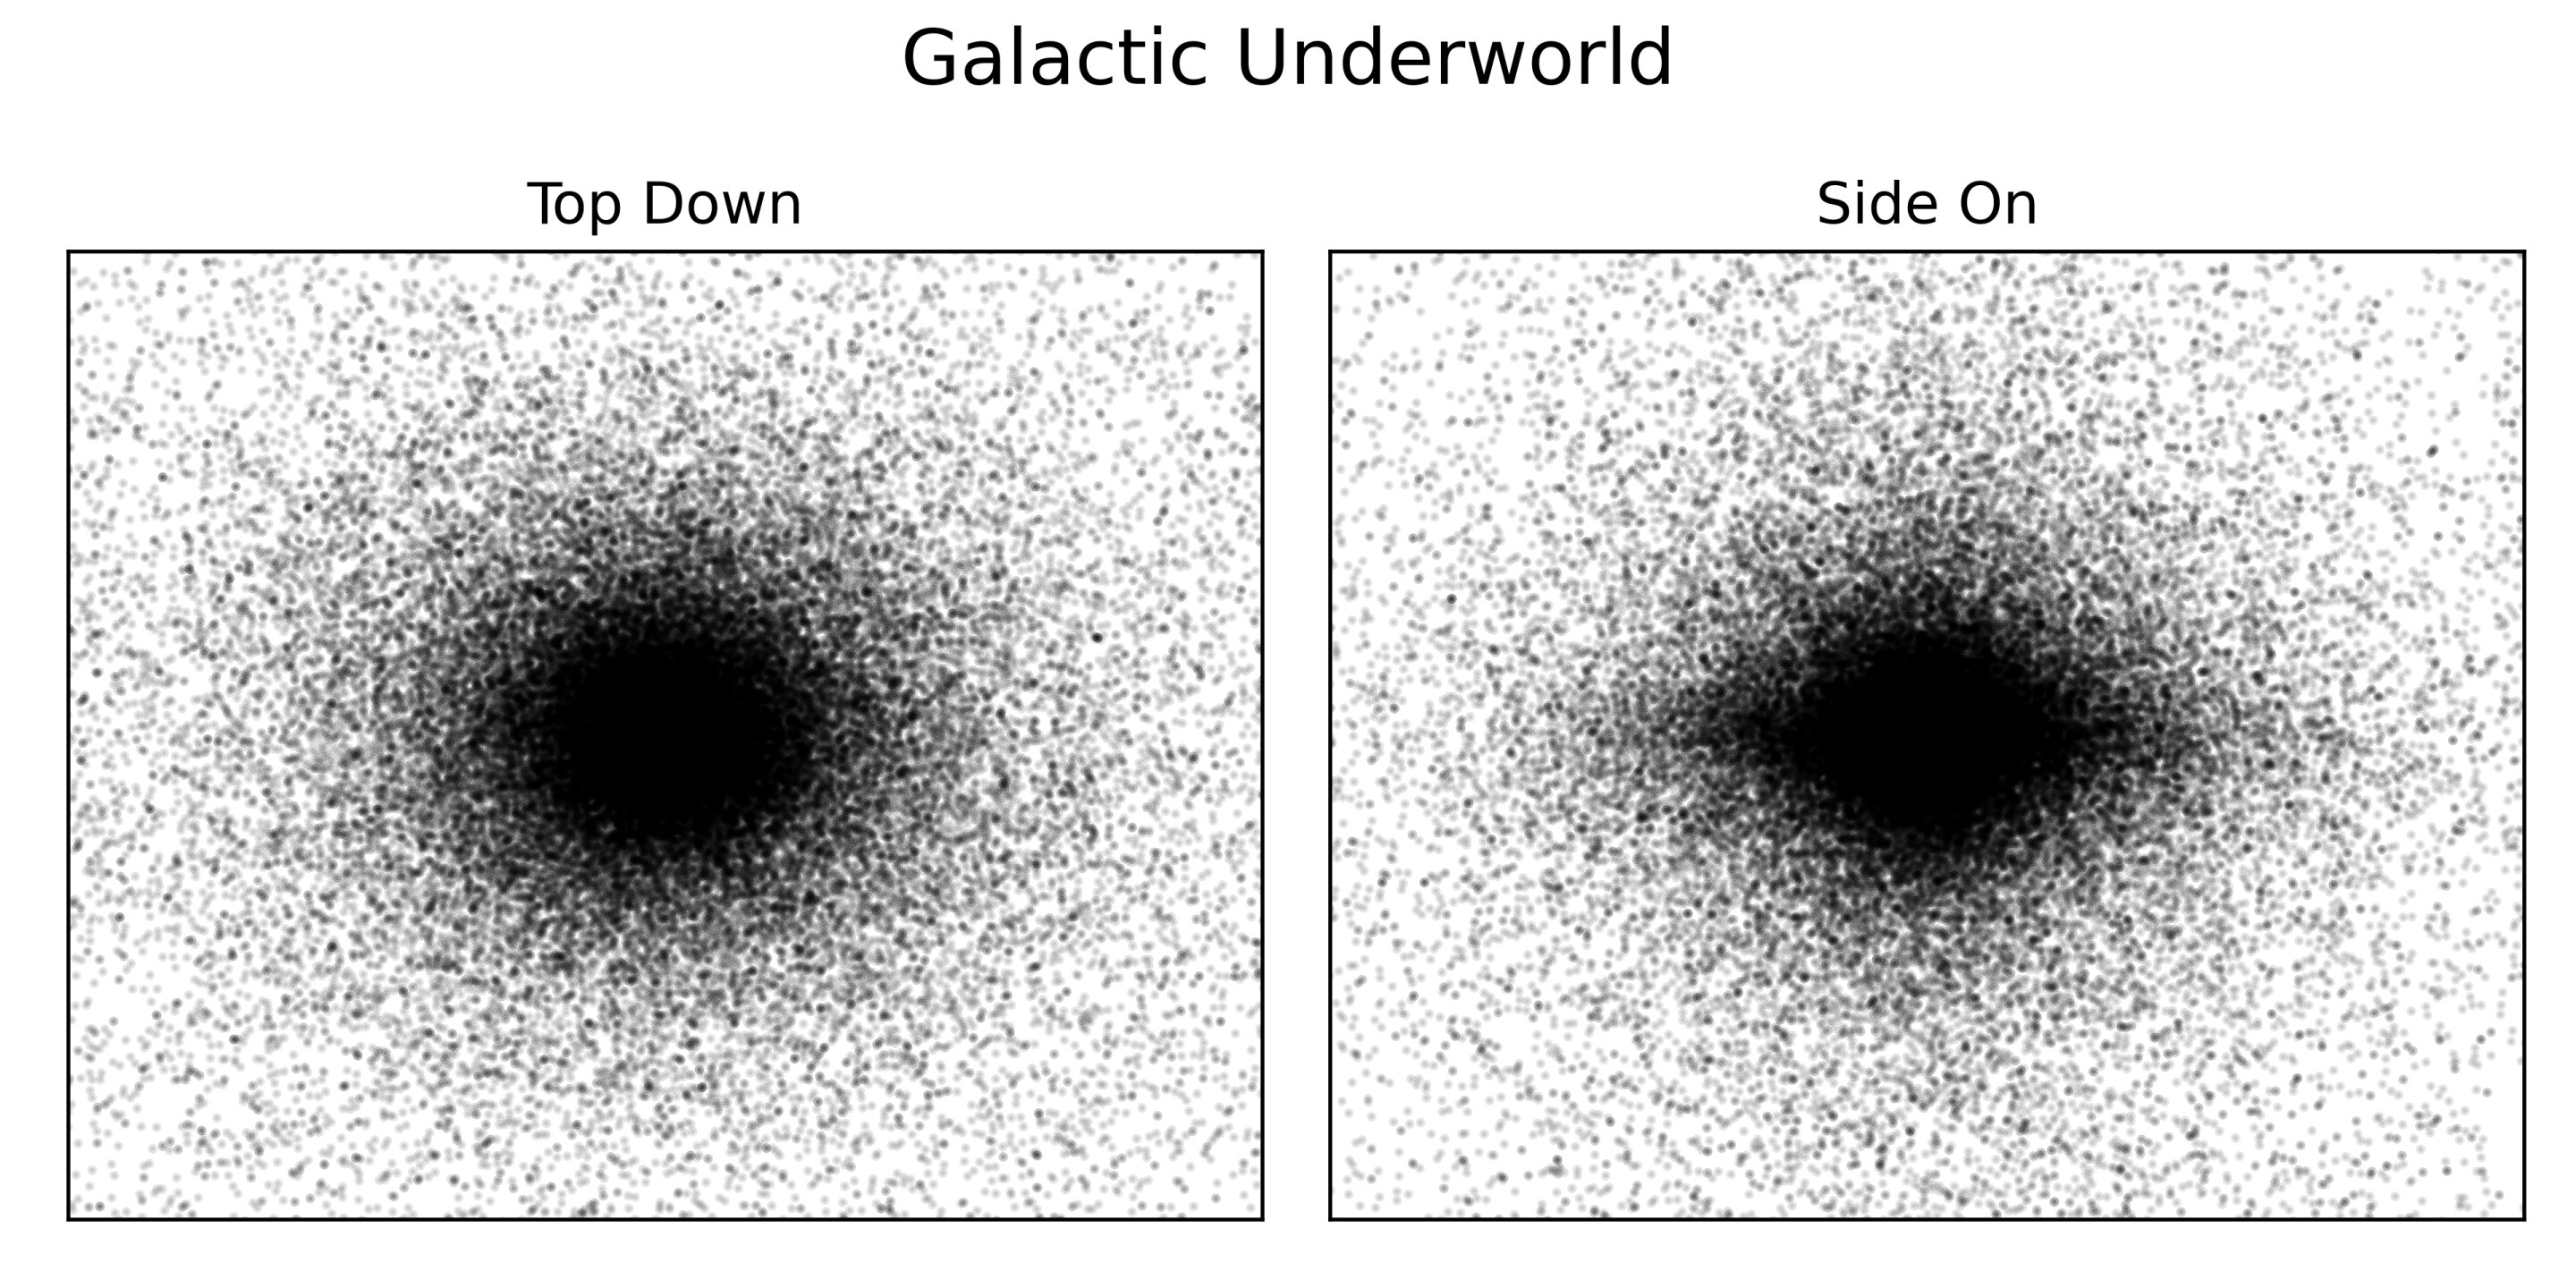 A simulation showing the distribution of black holes and neutron stars in the 'galactic netherworld'